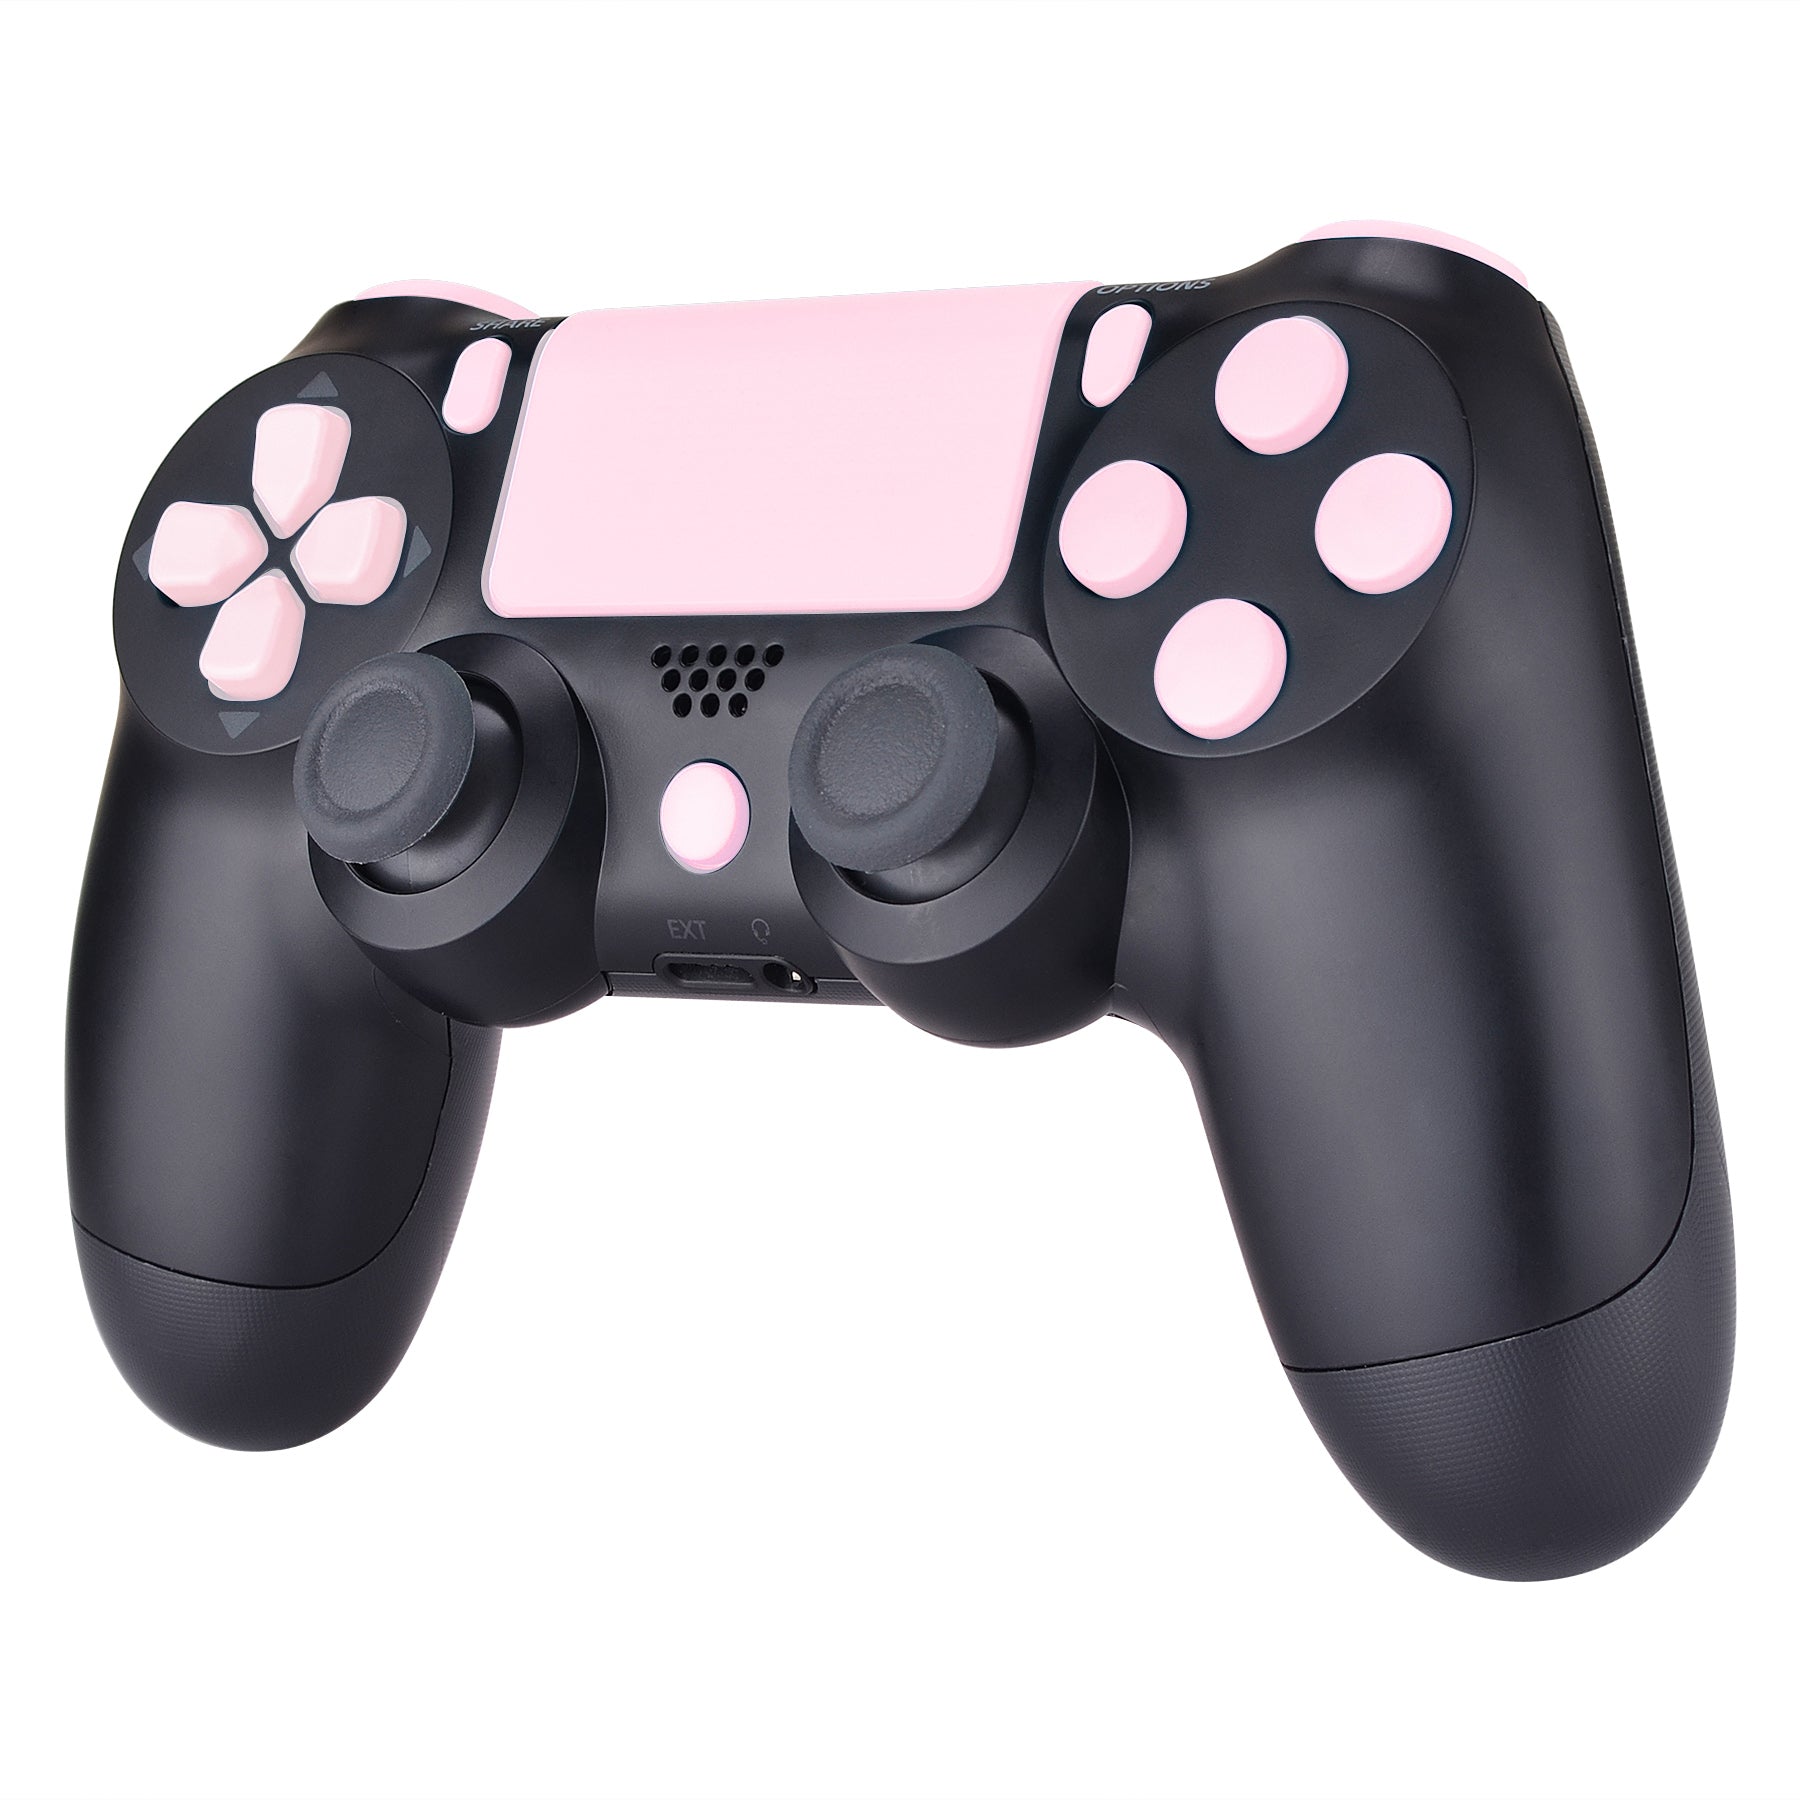 Pro Blossoms Full D-pad Triggers ps4 for Repair Controller Set Options Buttons – Buttons Controller, Action Pink Kit R2 for eXtremeRate Touchpad Slim L2 Home Replacement L1 ps4 Share eXtremeRate Cherry R1